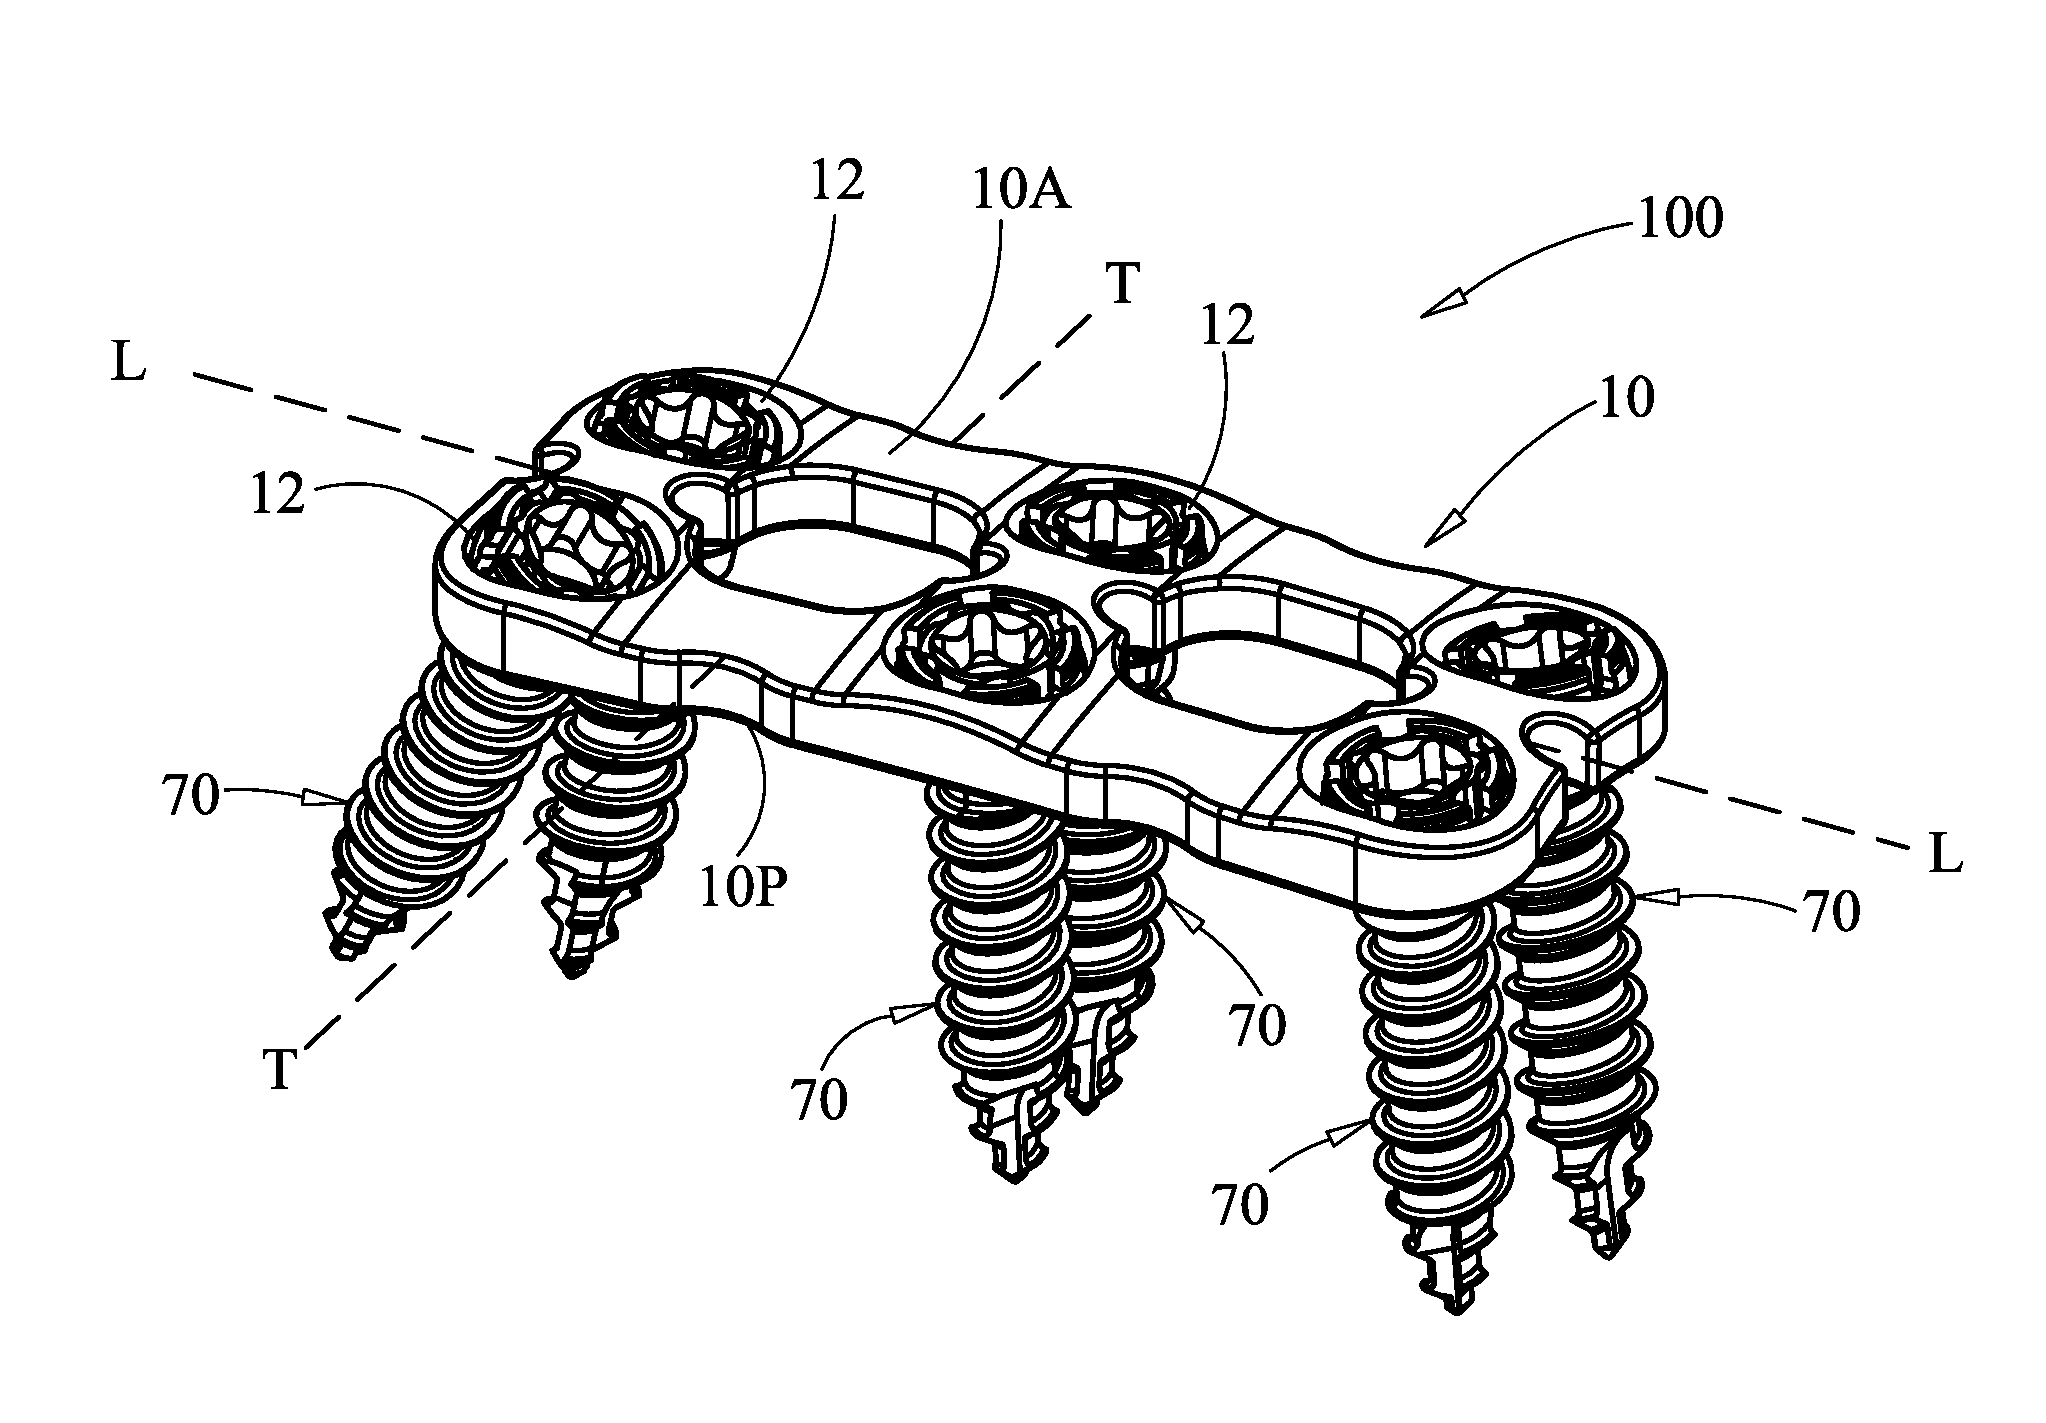 Surgical plate system and method